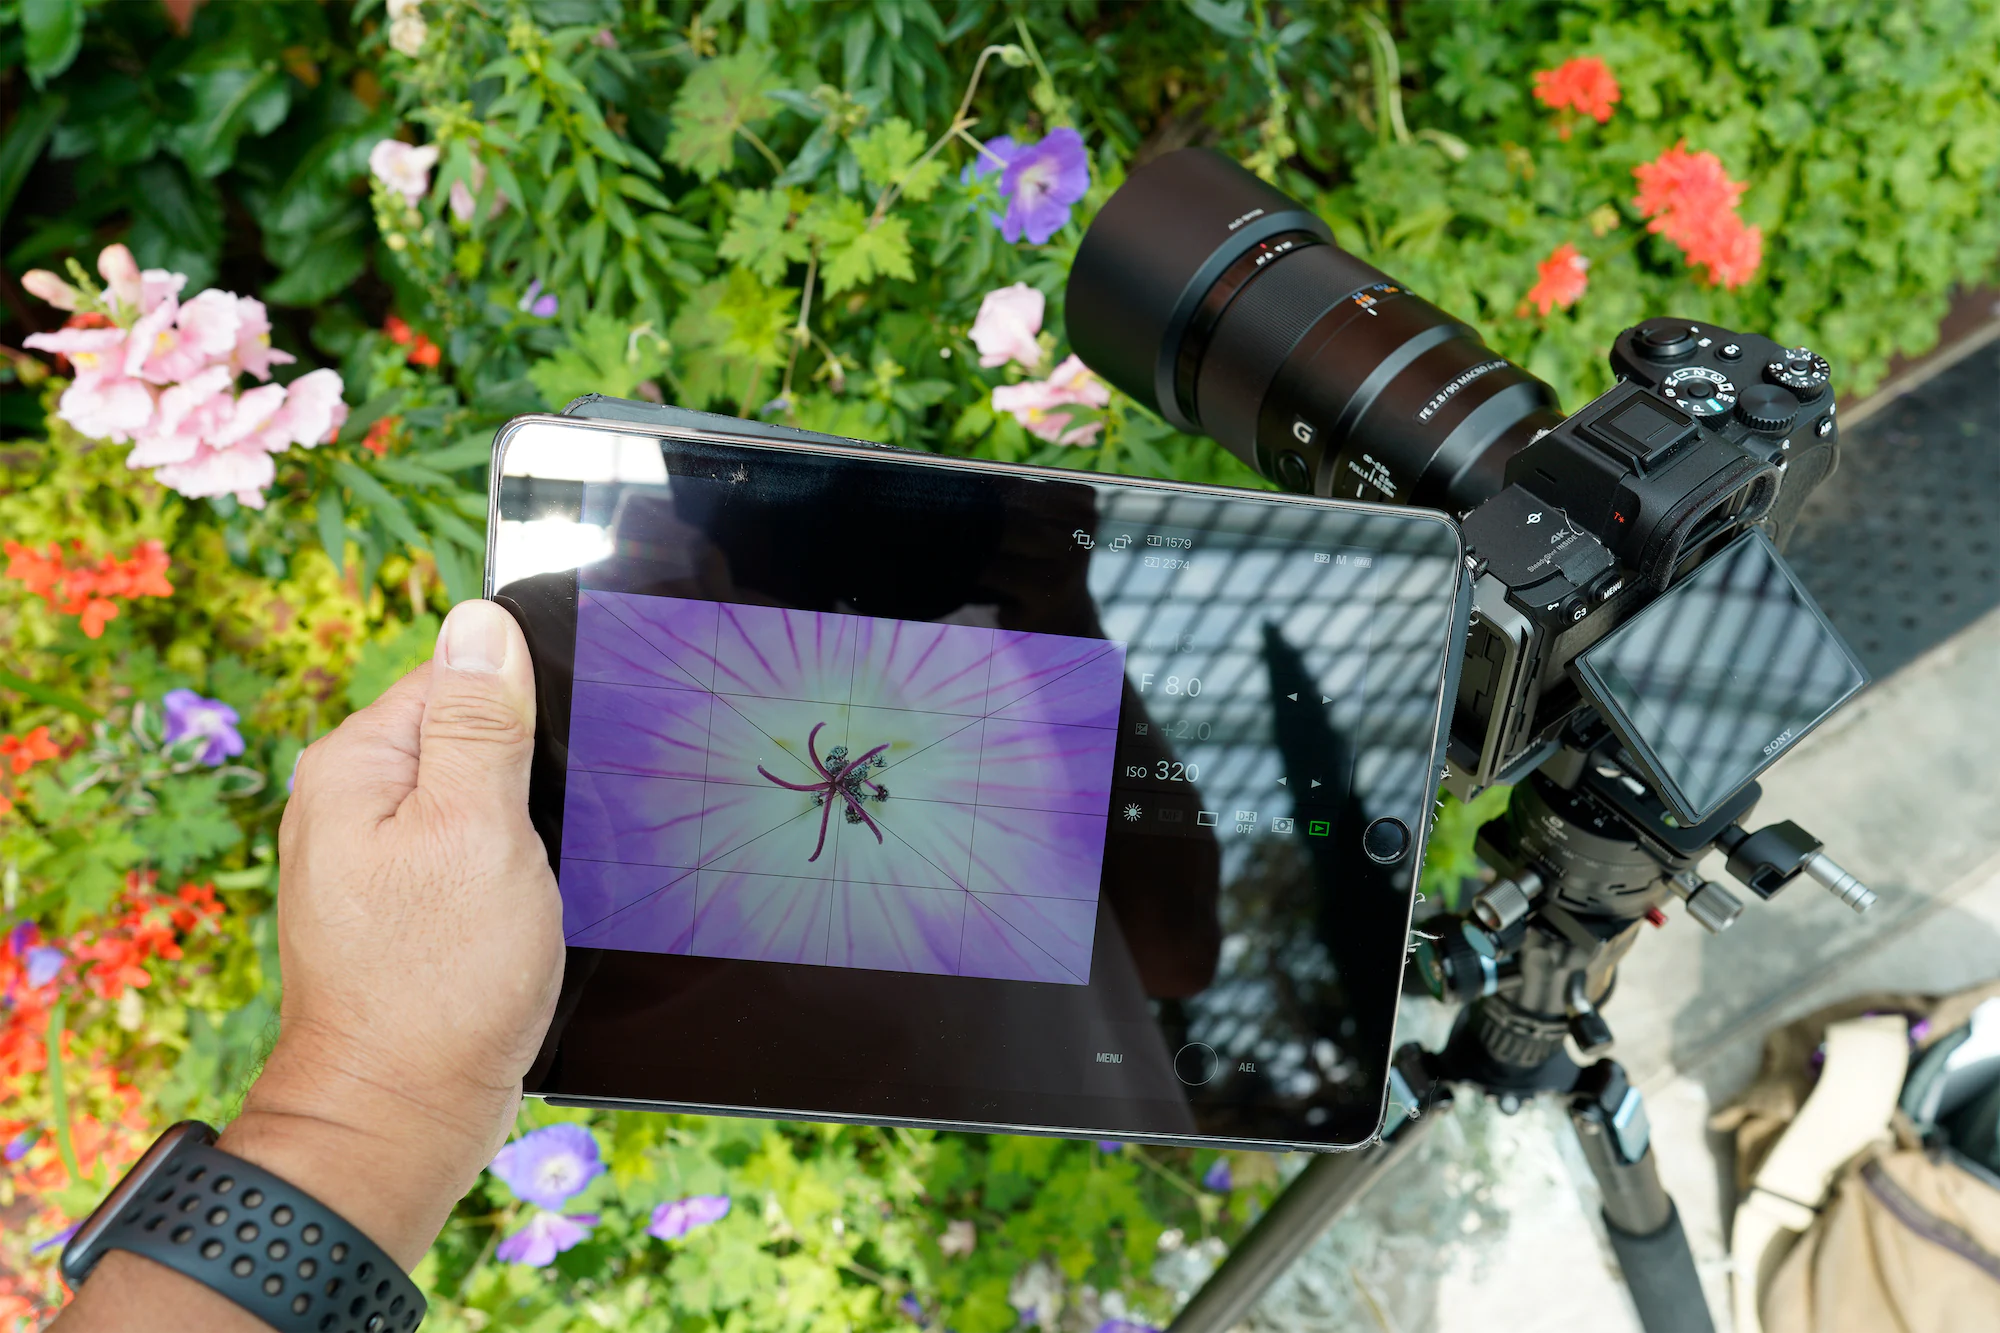 Use Sony&rsquo;s Imaging Edge mobile application on an external smart device to check your composition and focus more easily